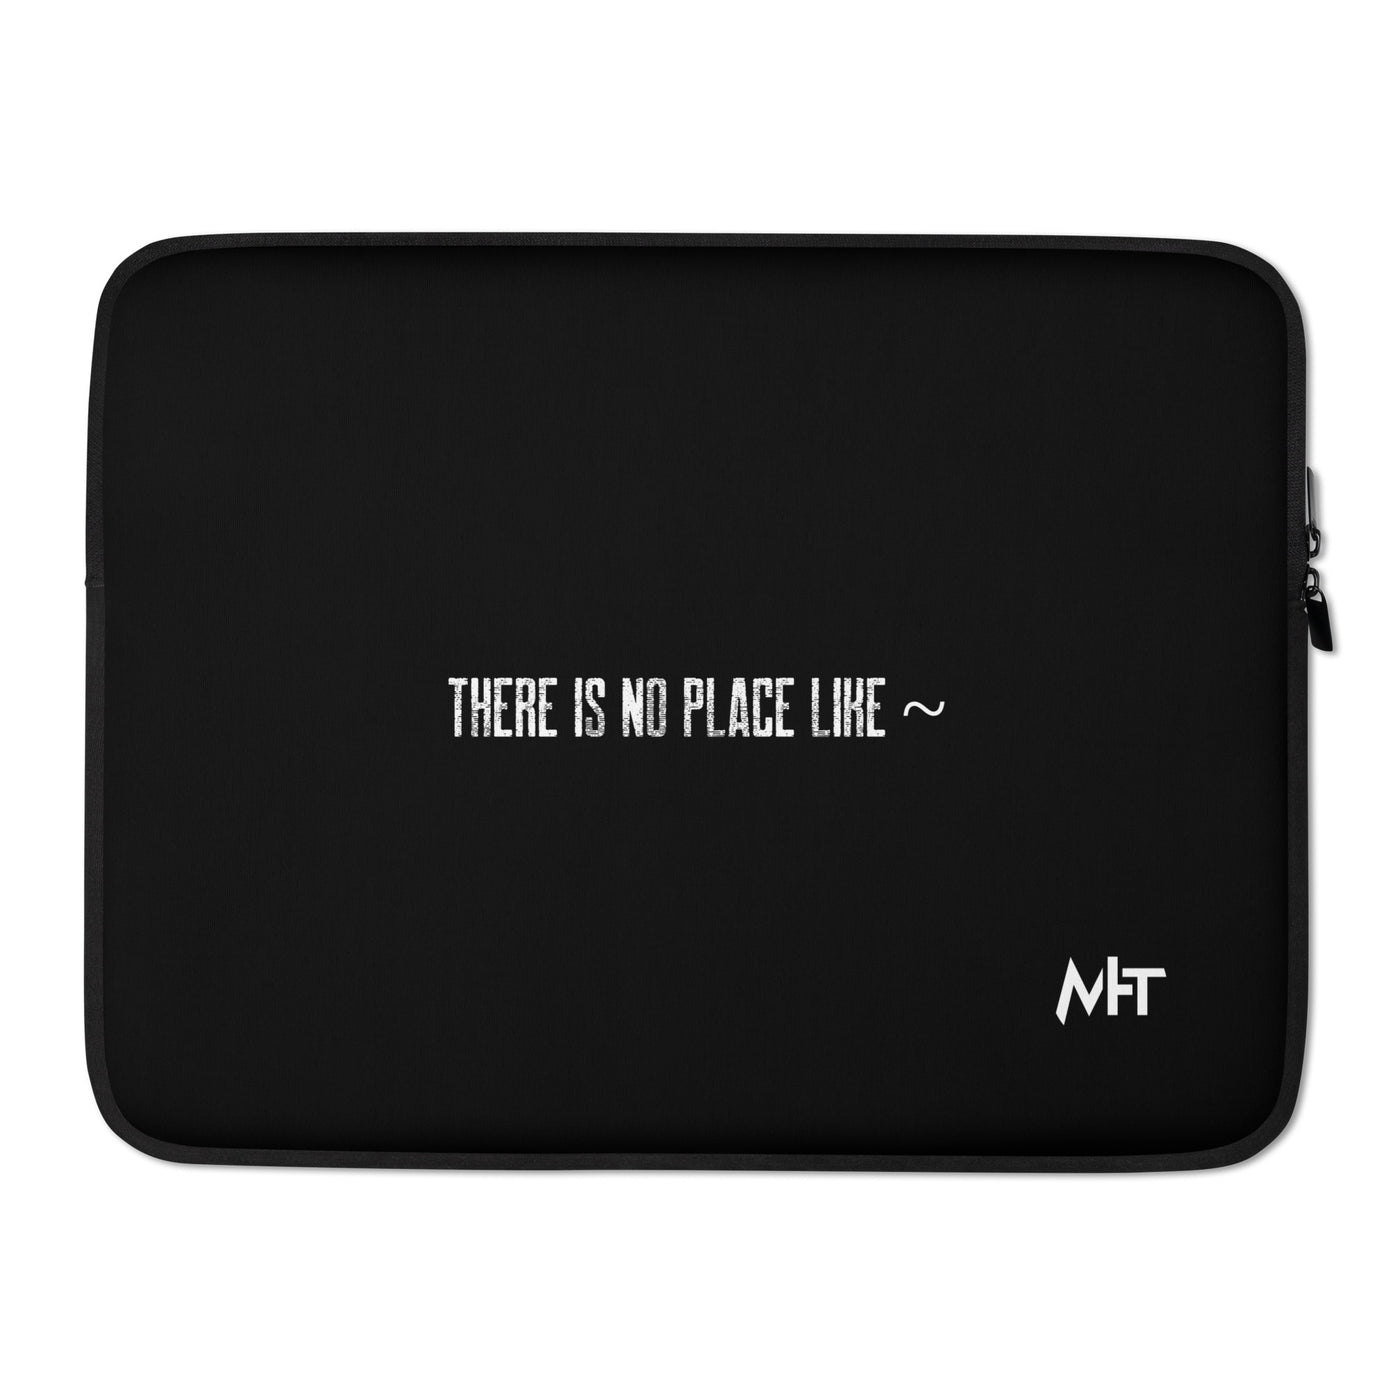 There is no Place like ~ V2 - Laptop Sleeve